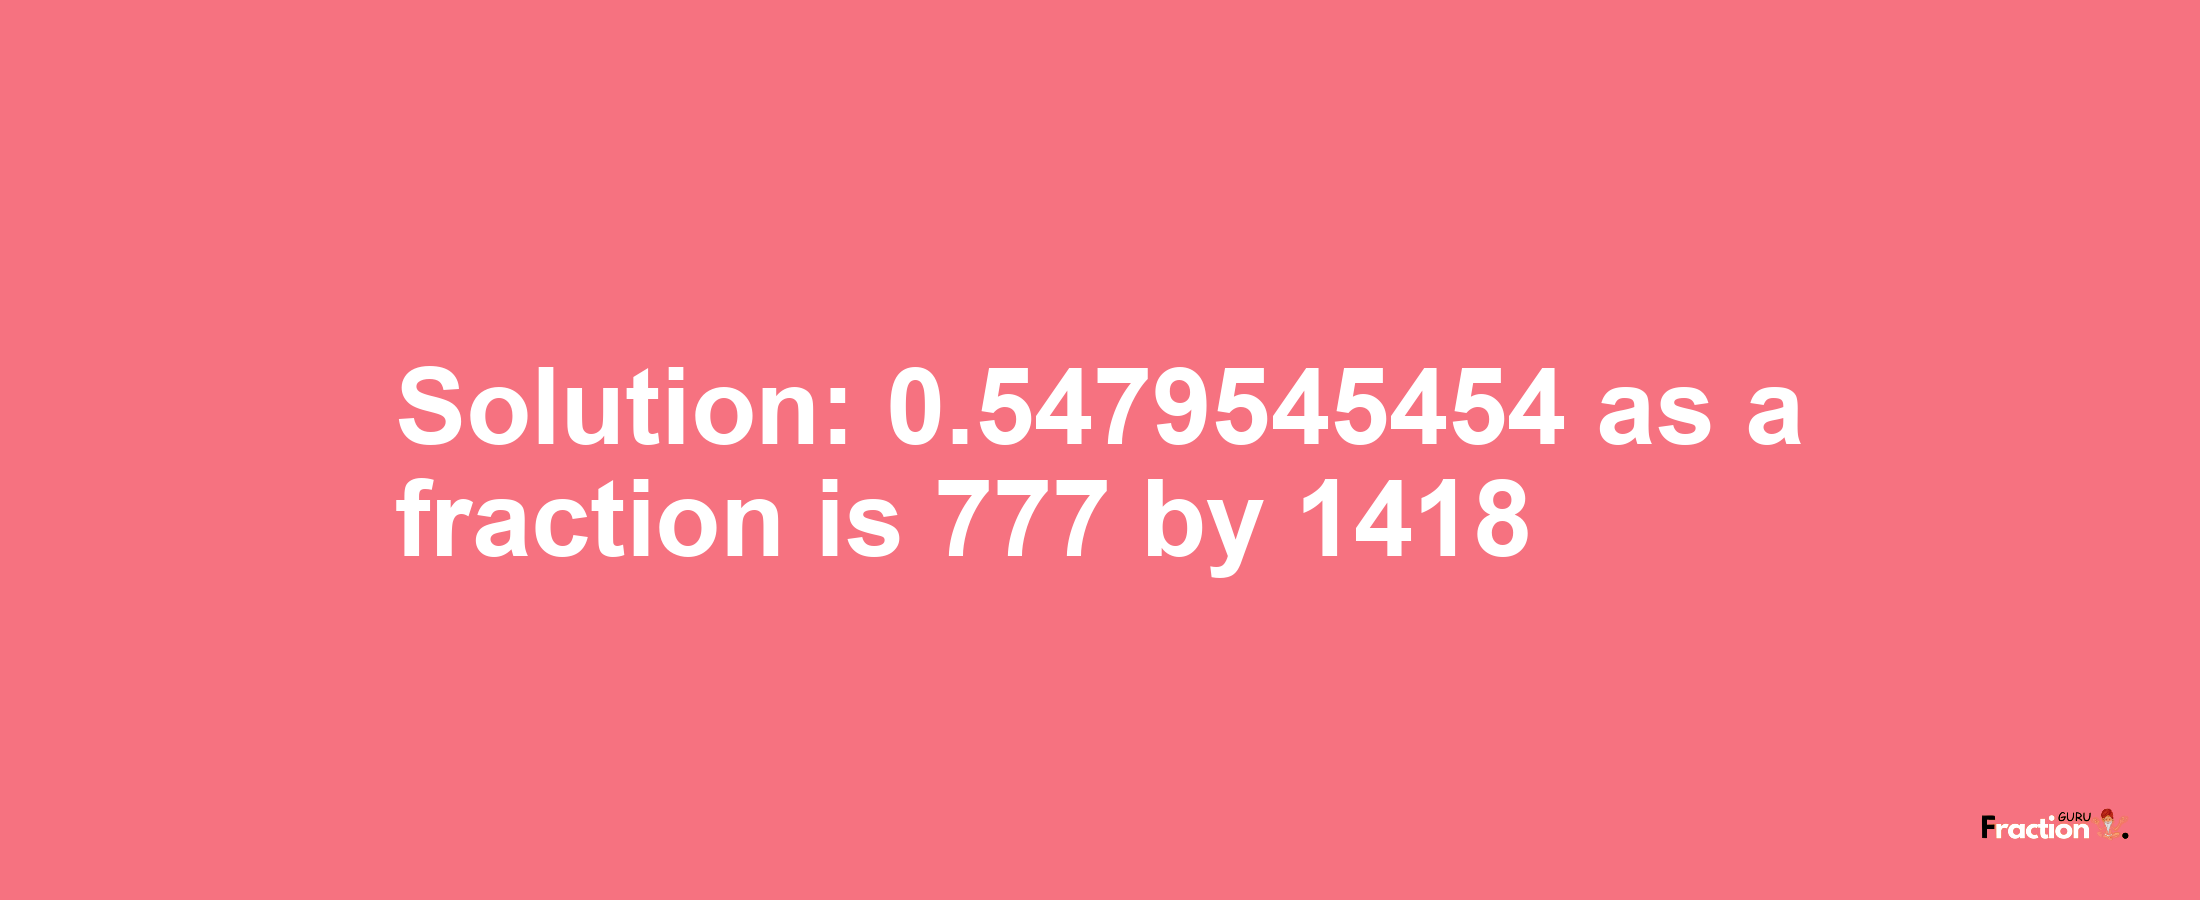 Solution:0.5479545454 as a fraction is 777/1418